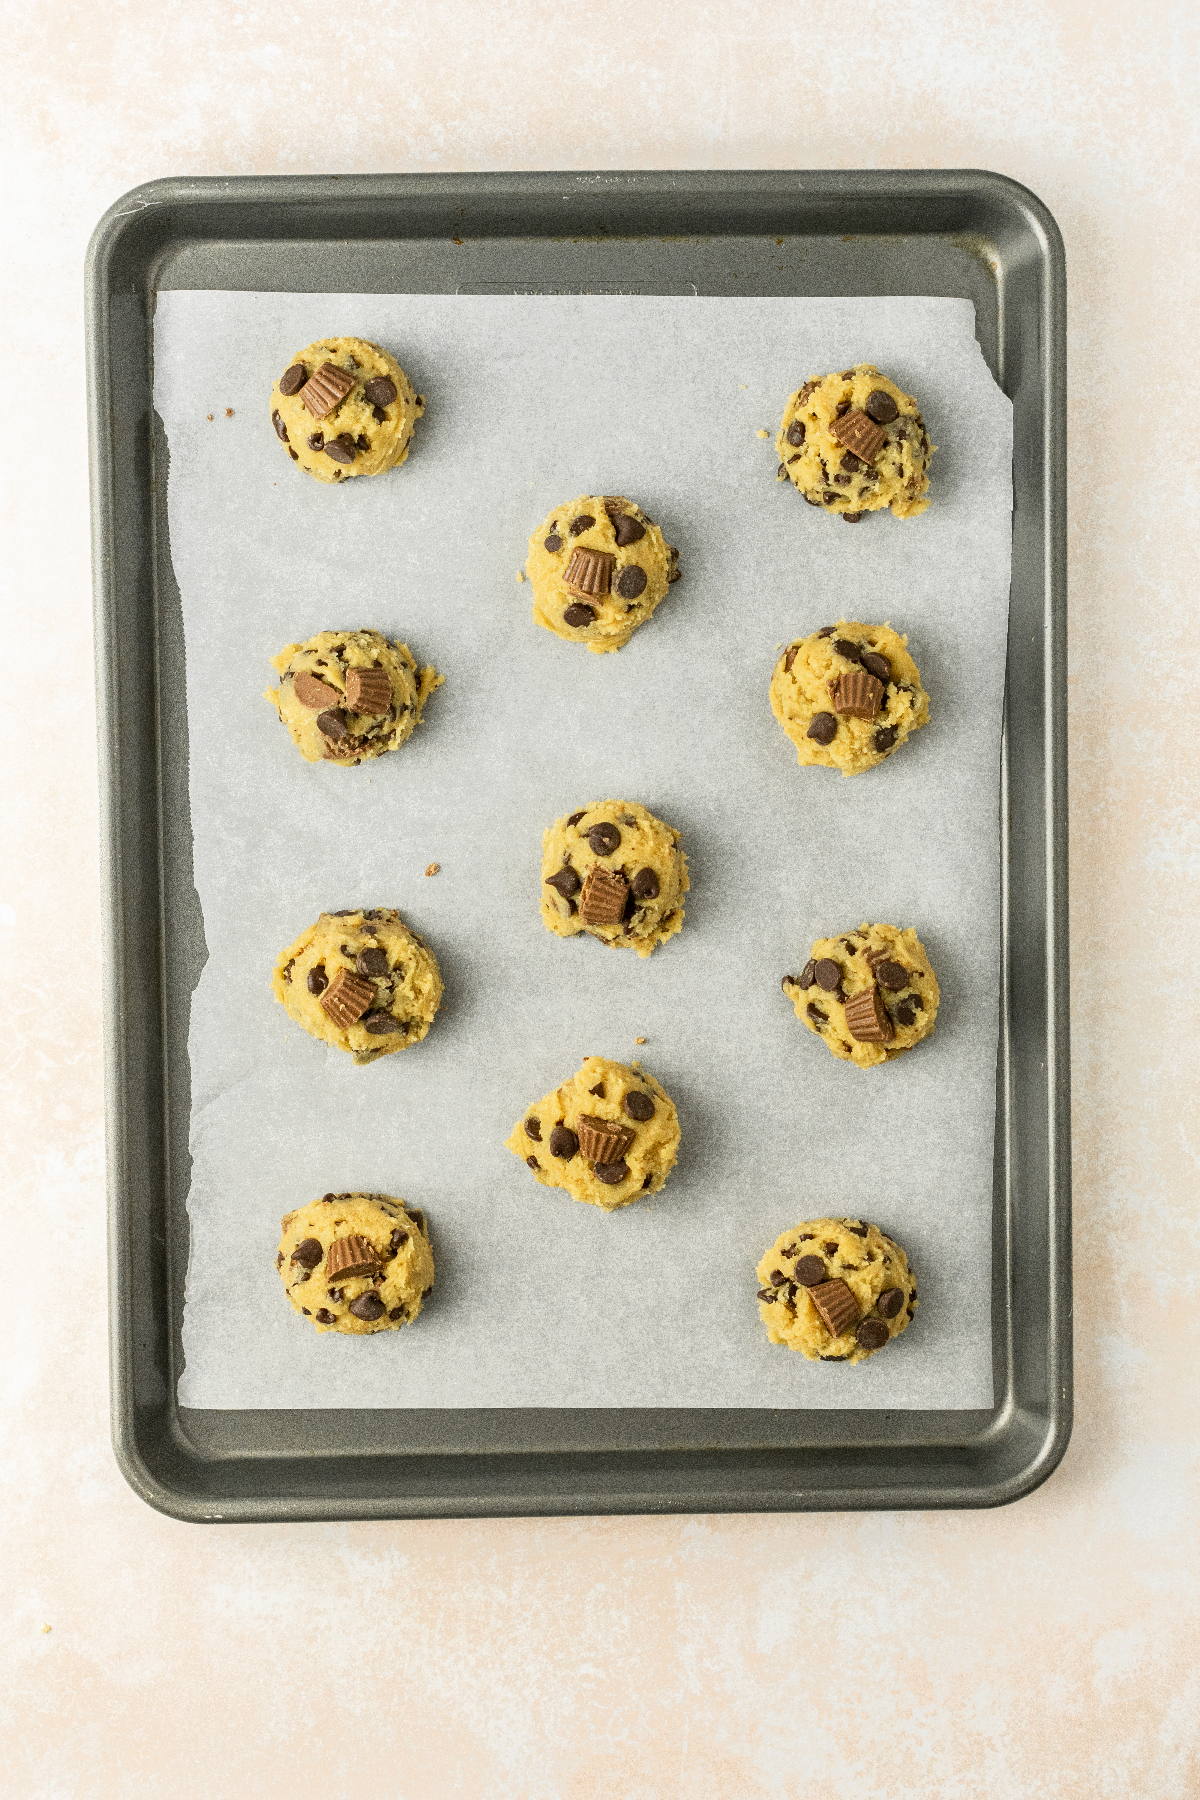 11 cookie dough balls on a parchment lined baking sheet.